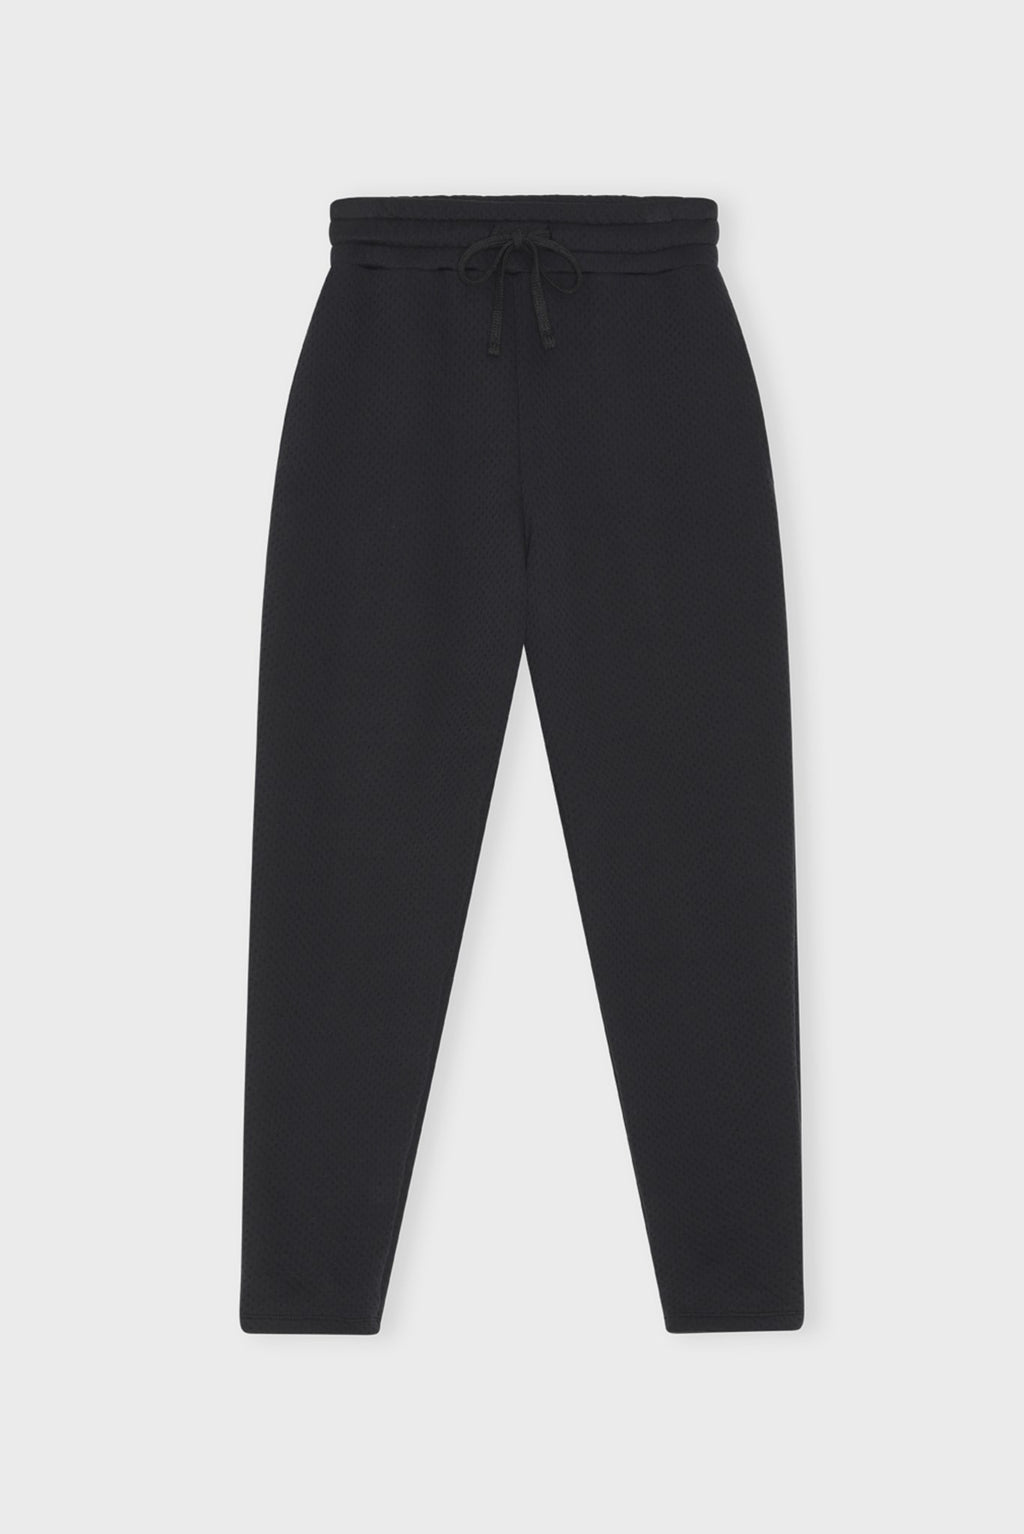 All in Motion Mens Black XXL Sweatpants Cozy Pant Quick Dry W5 for sale  online 